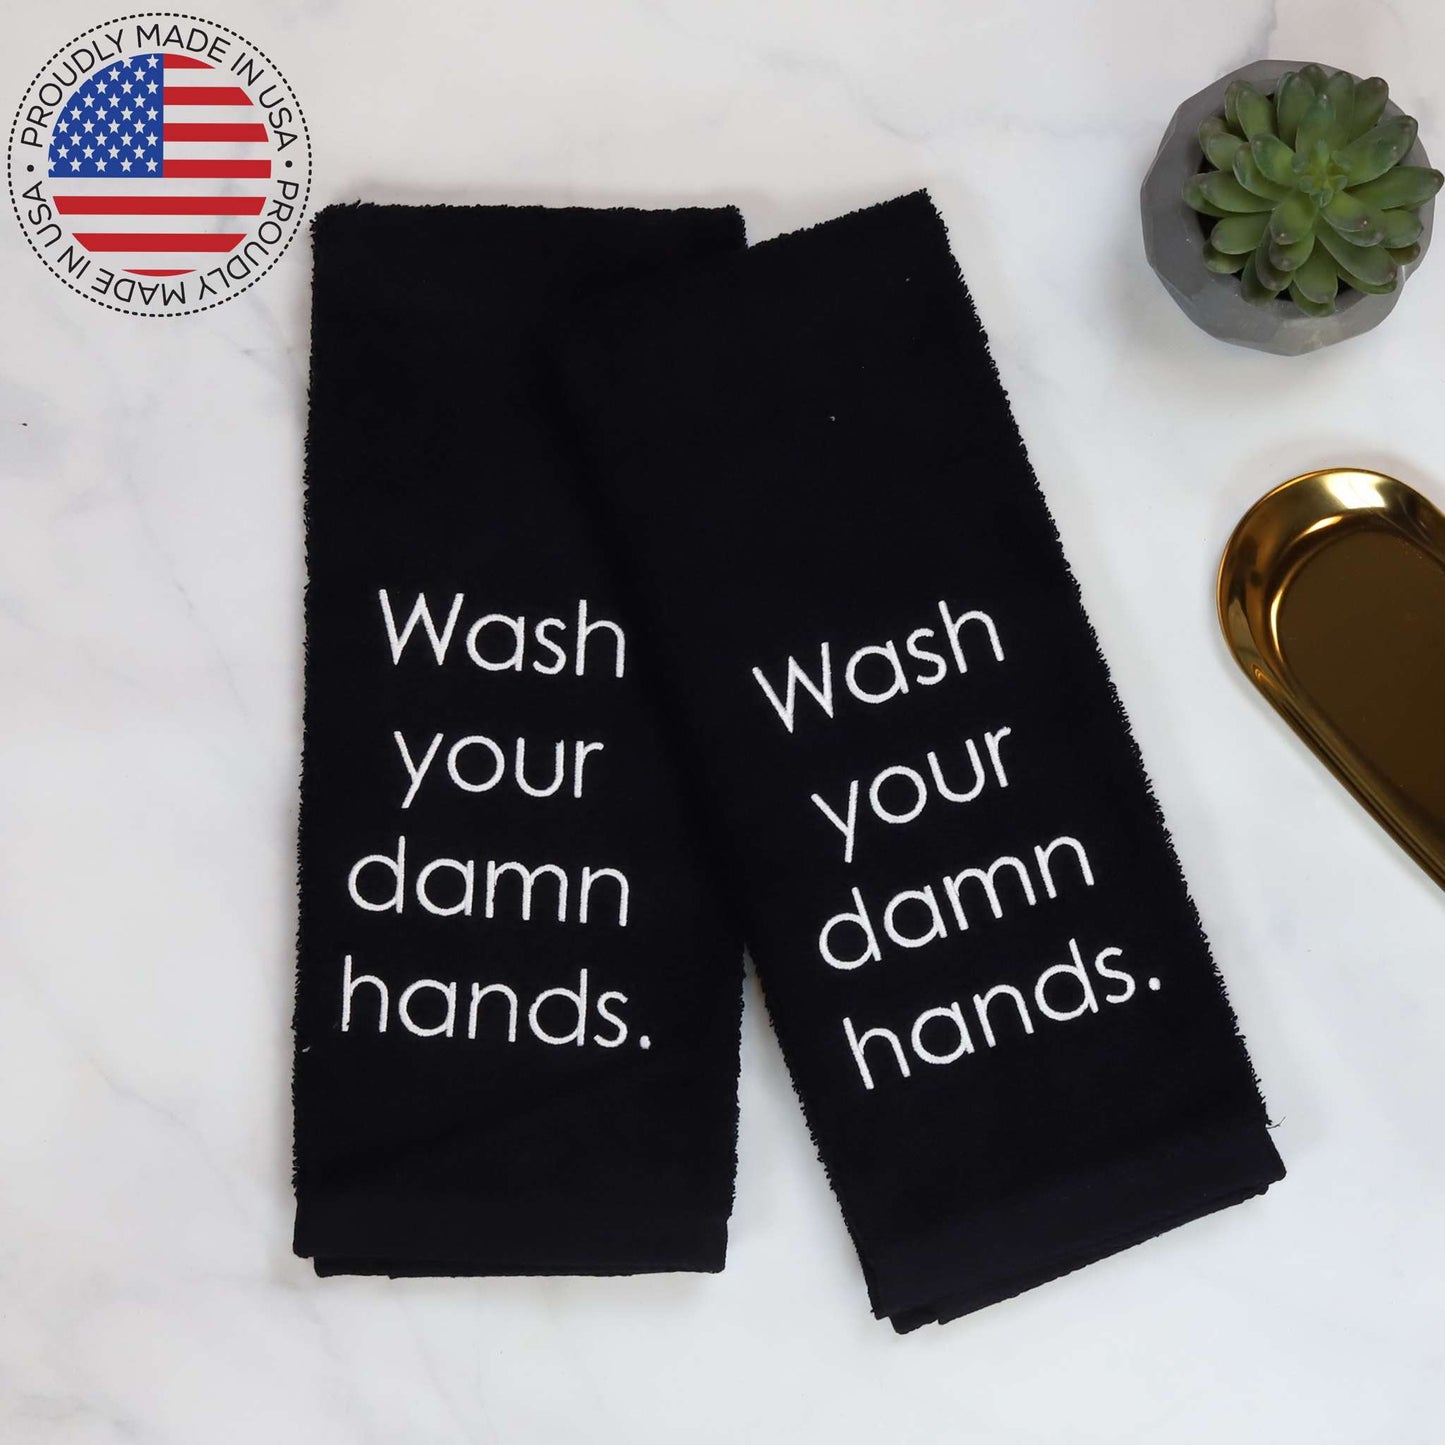 Mill & Thread 2pk Embroidered Hand Towel - Wash Your Damn Hands